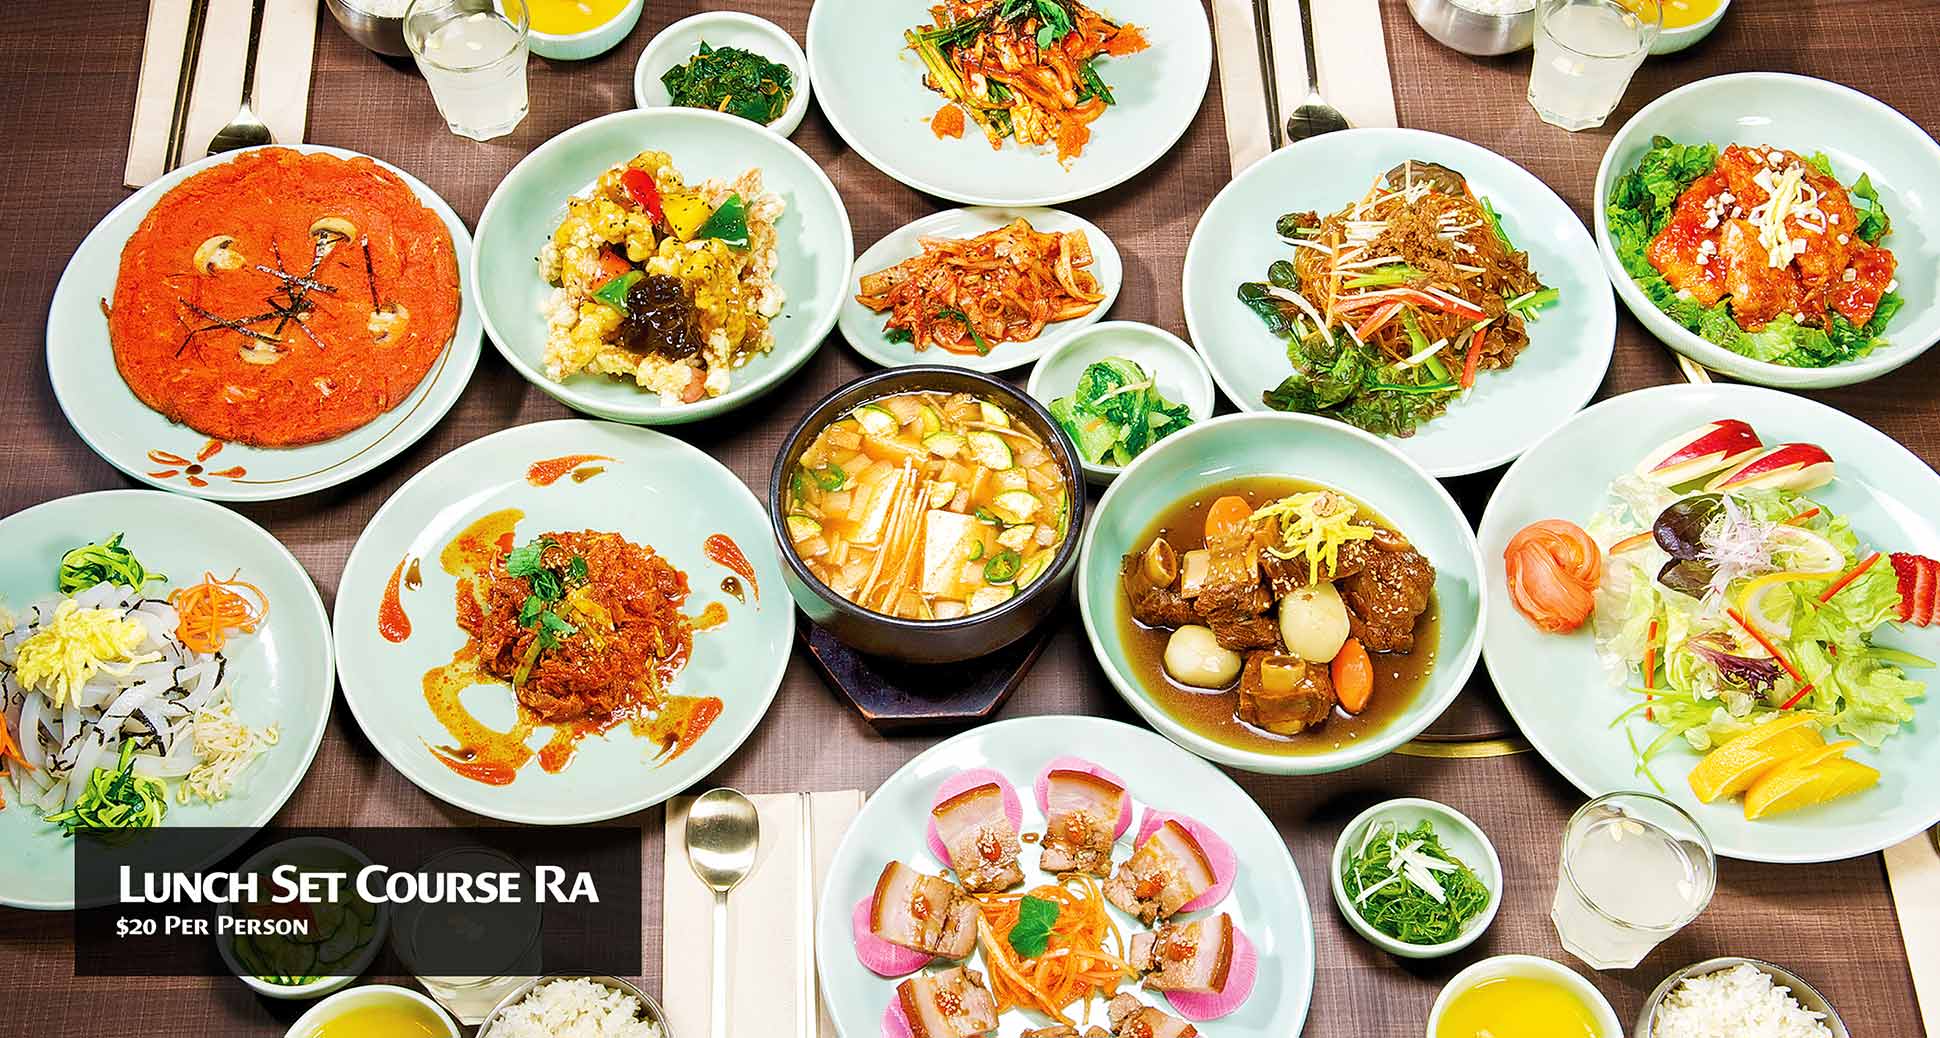 Come and enjoy the last long weekend of summer at sura korean Cuisine!